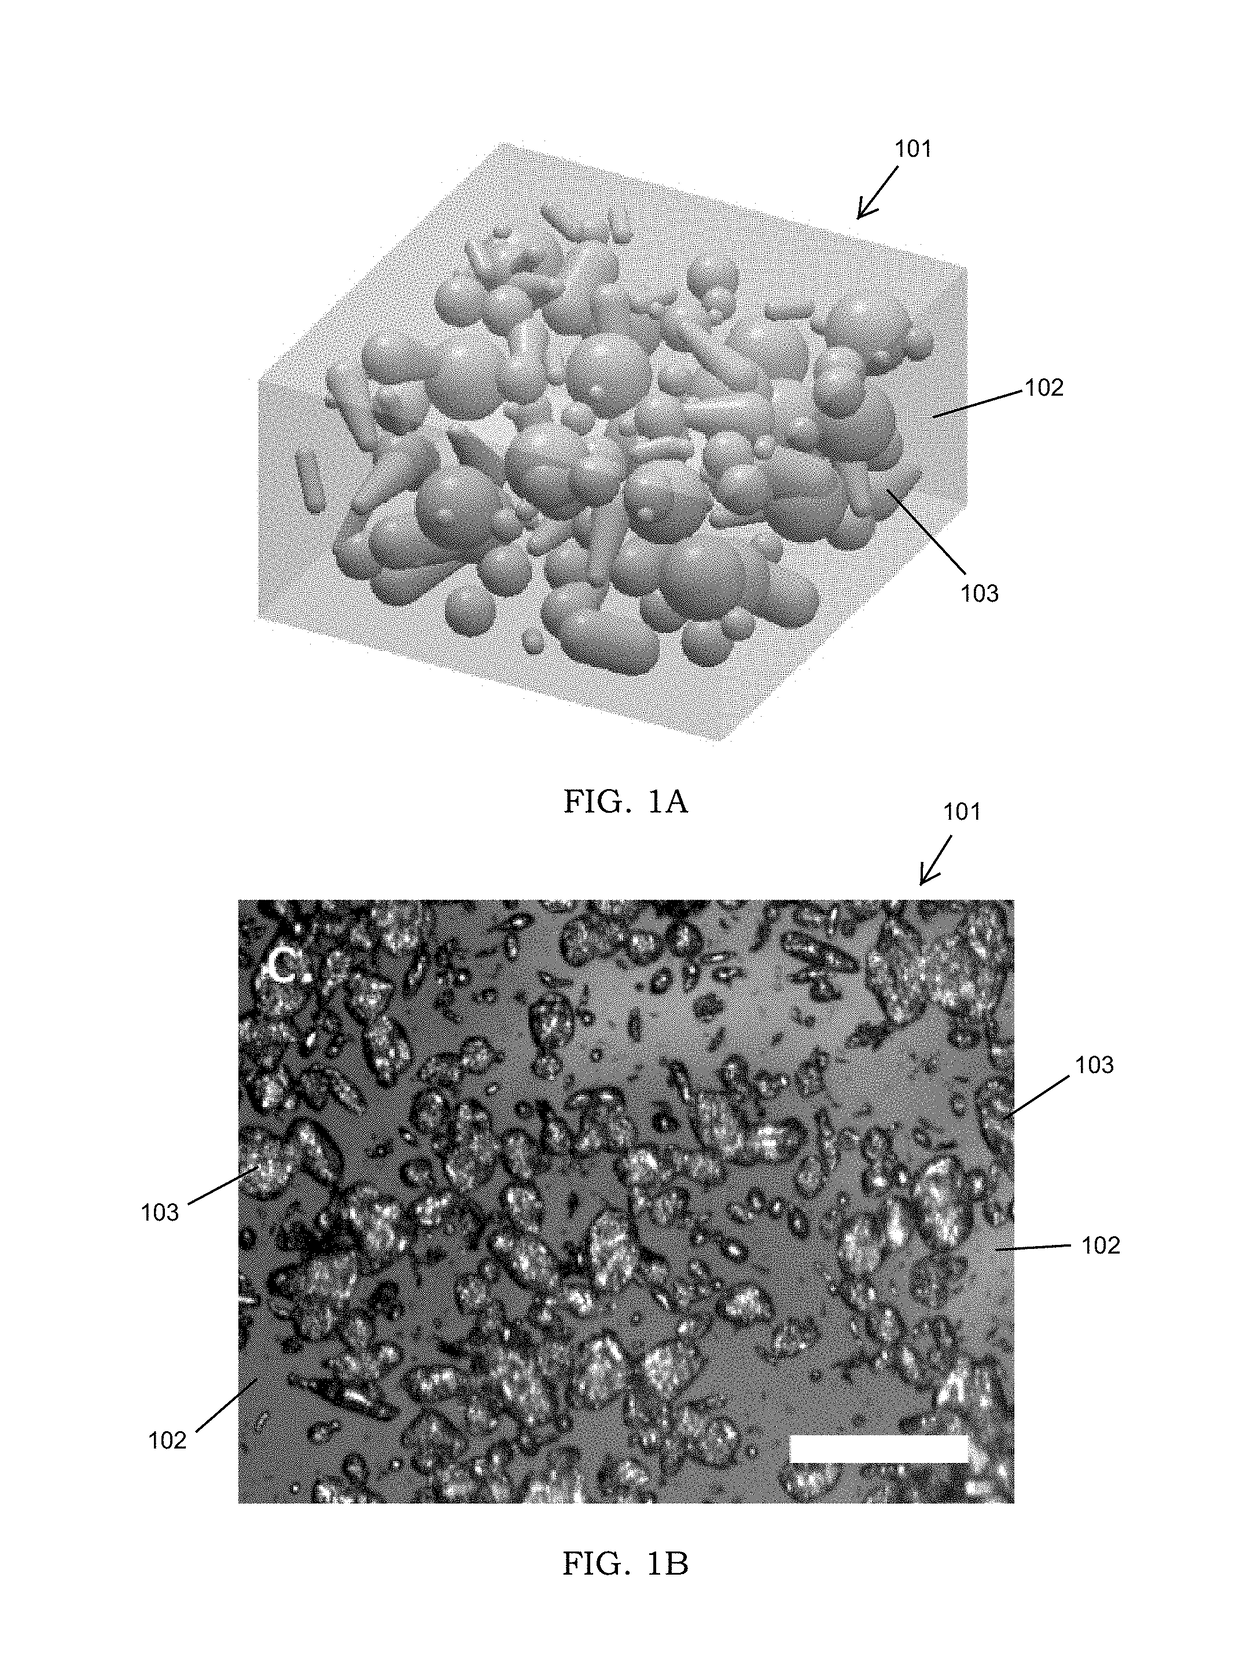 Polymer Composite with Liquid Phase Metal Inclusions